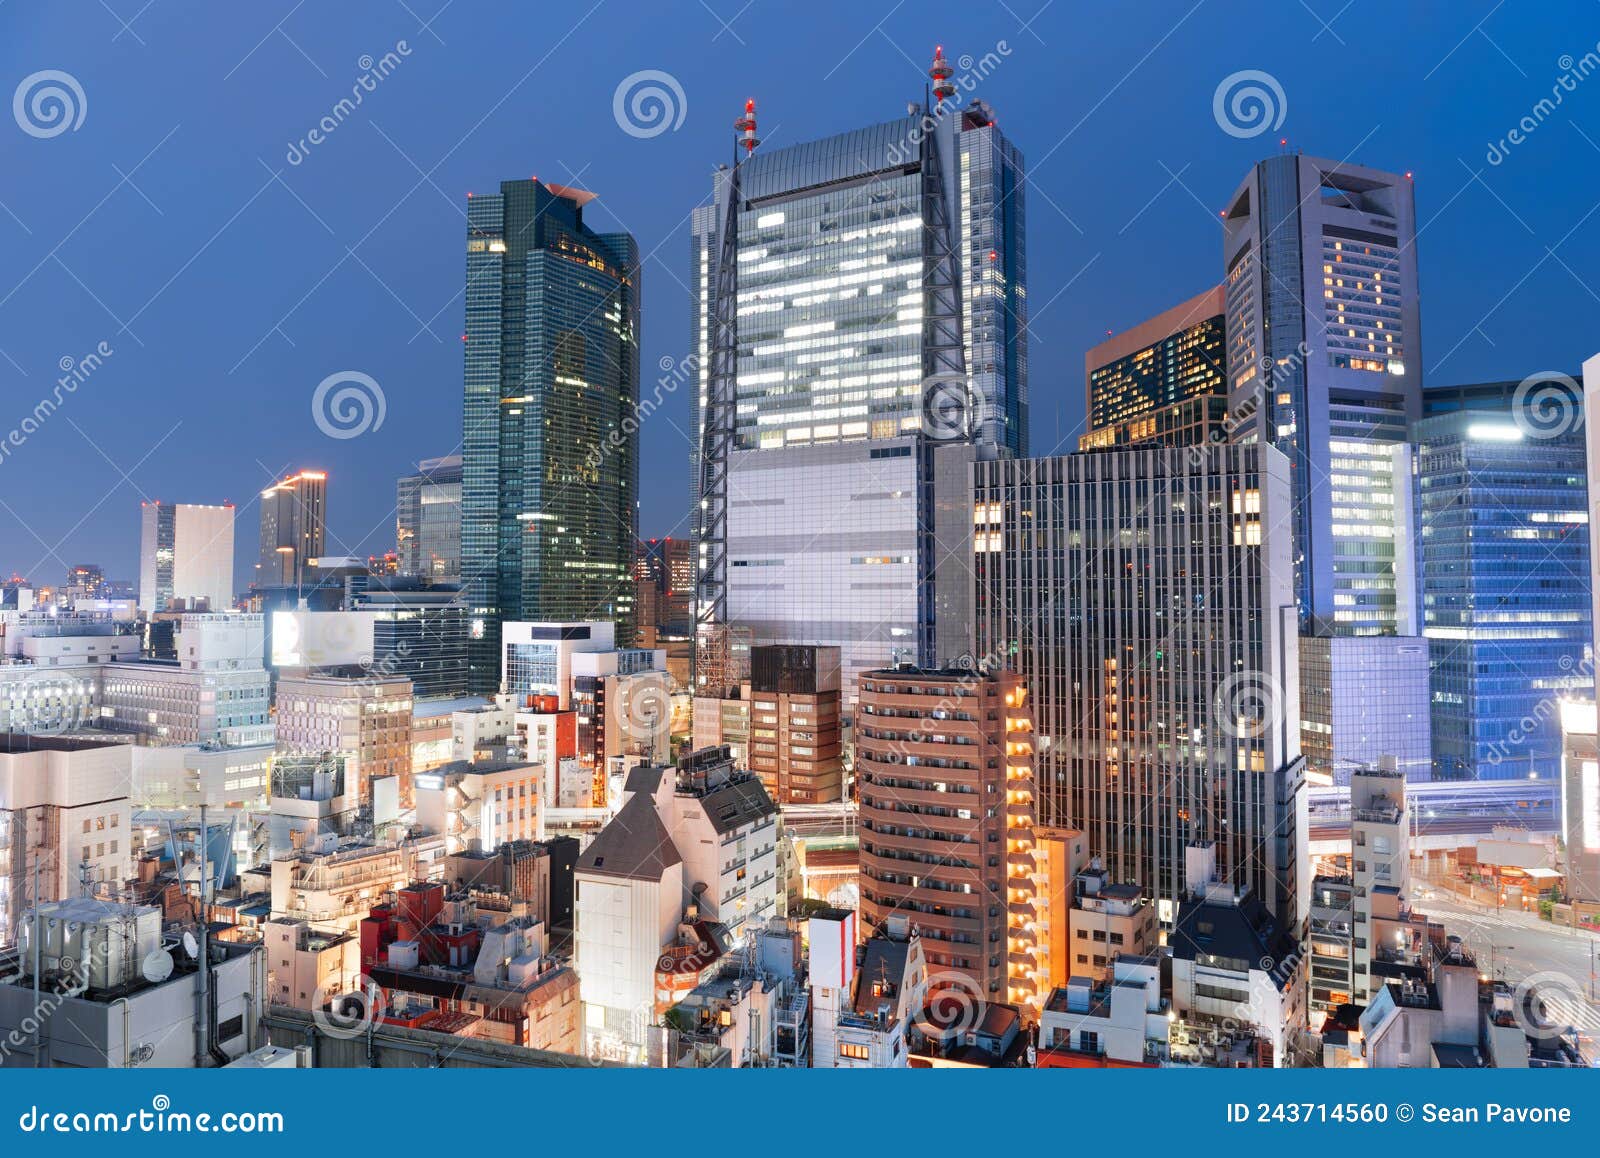 tokyo, japan cityscape in the business district of toranomon